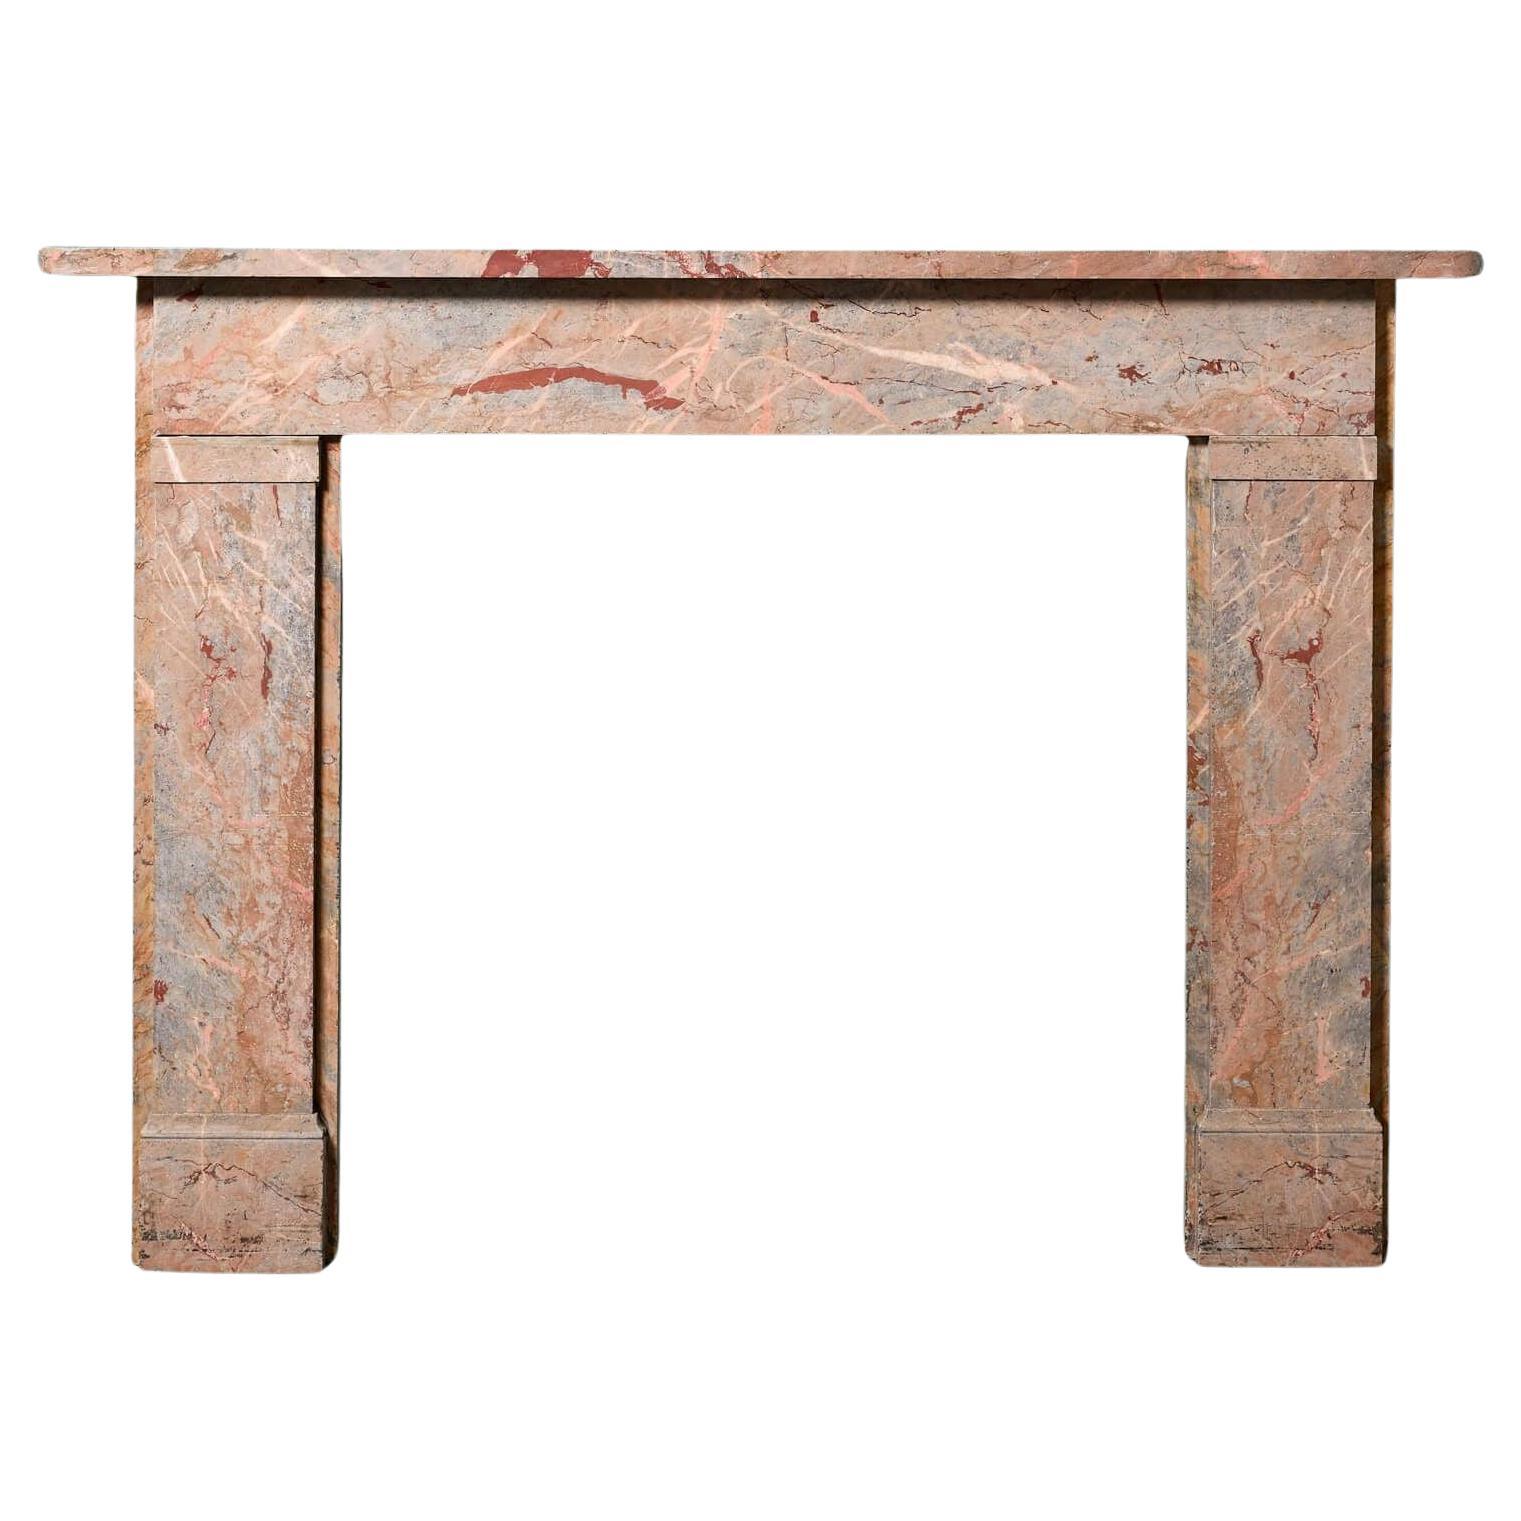 Antique 19th Century Breccia Marble Fireplace For Sale